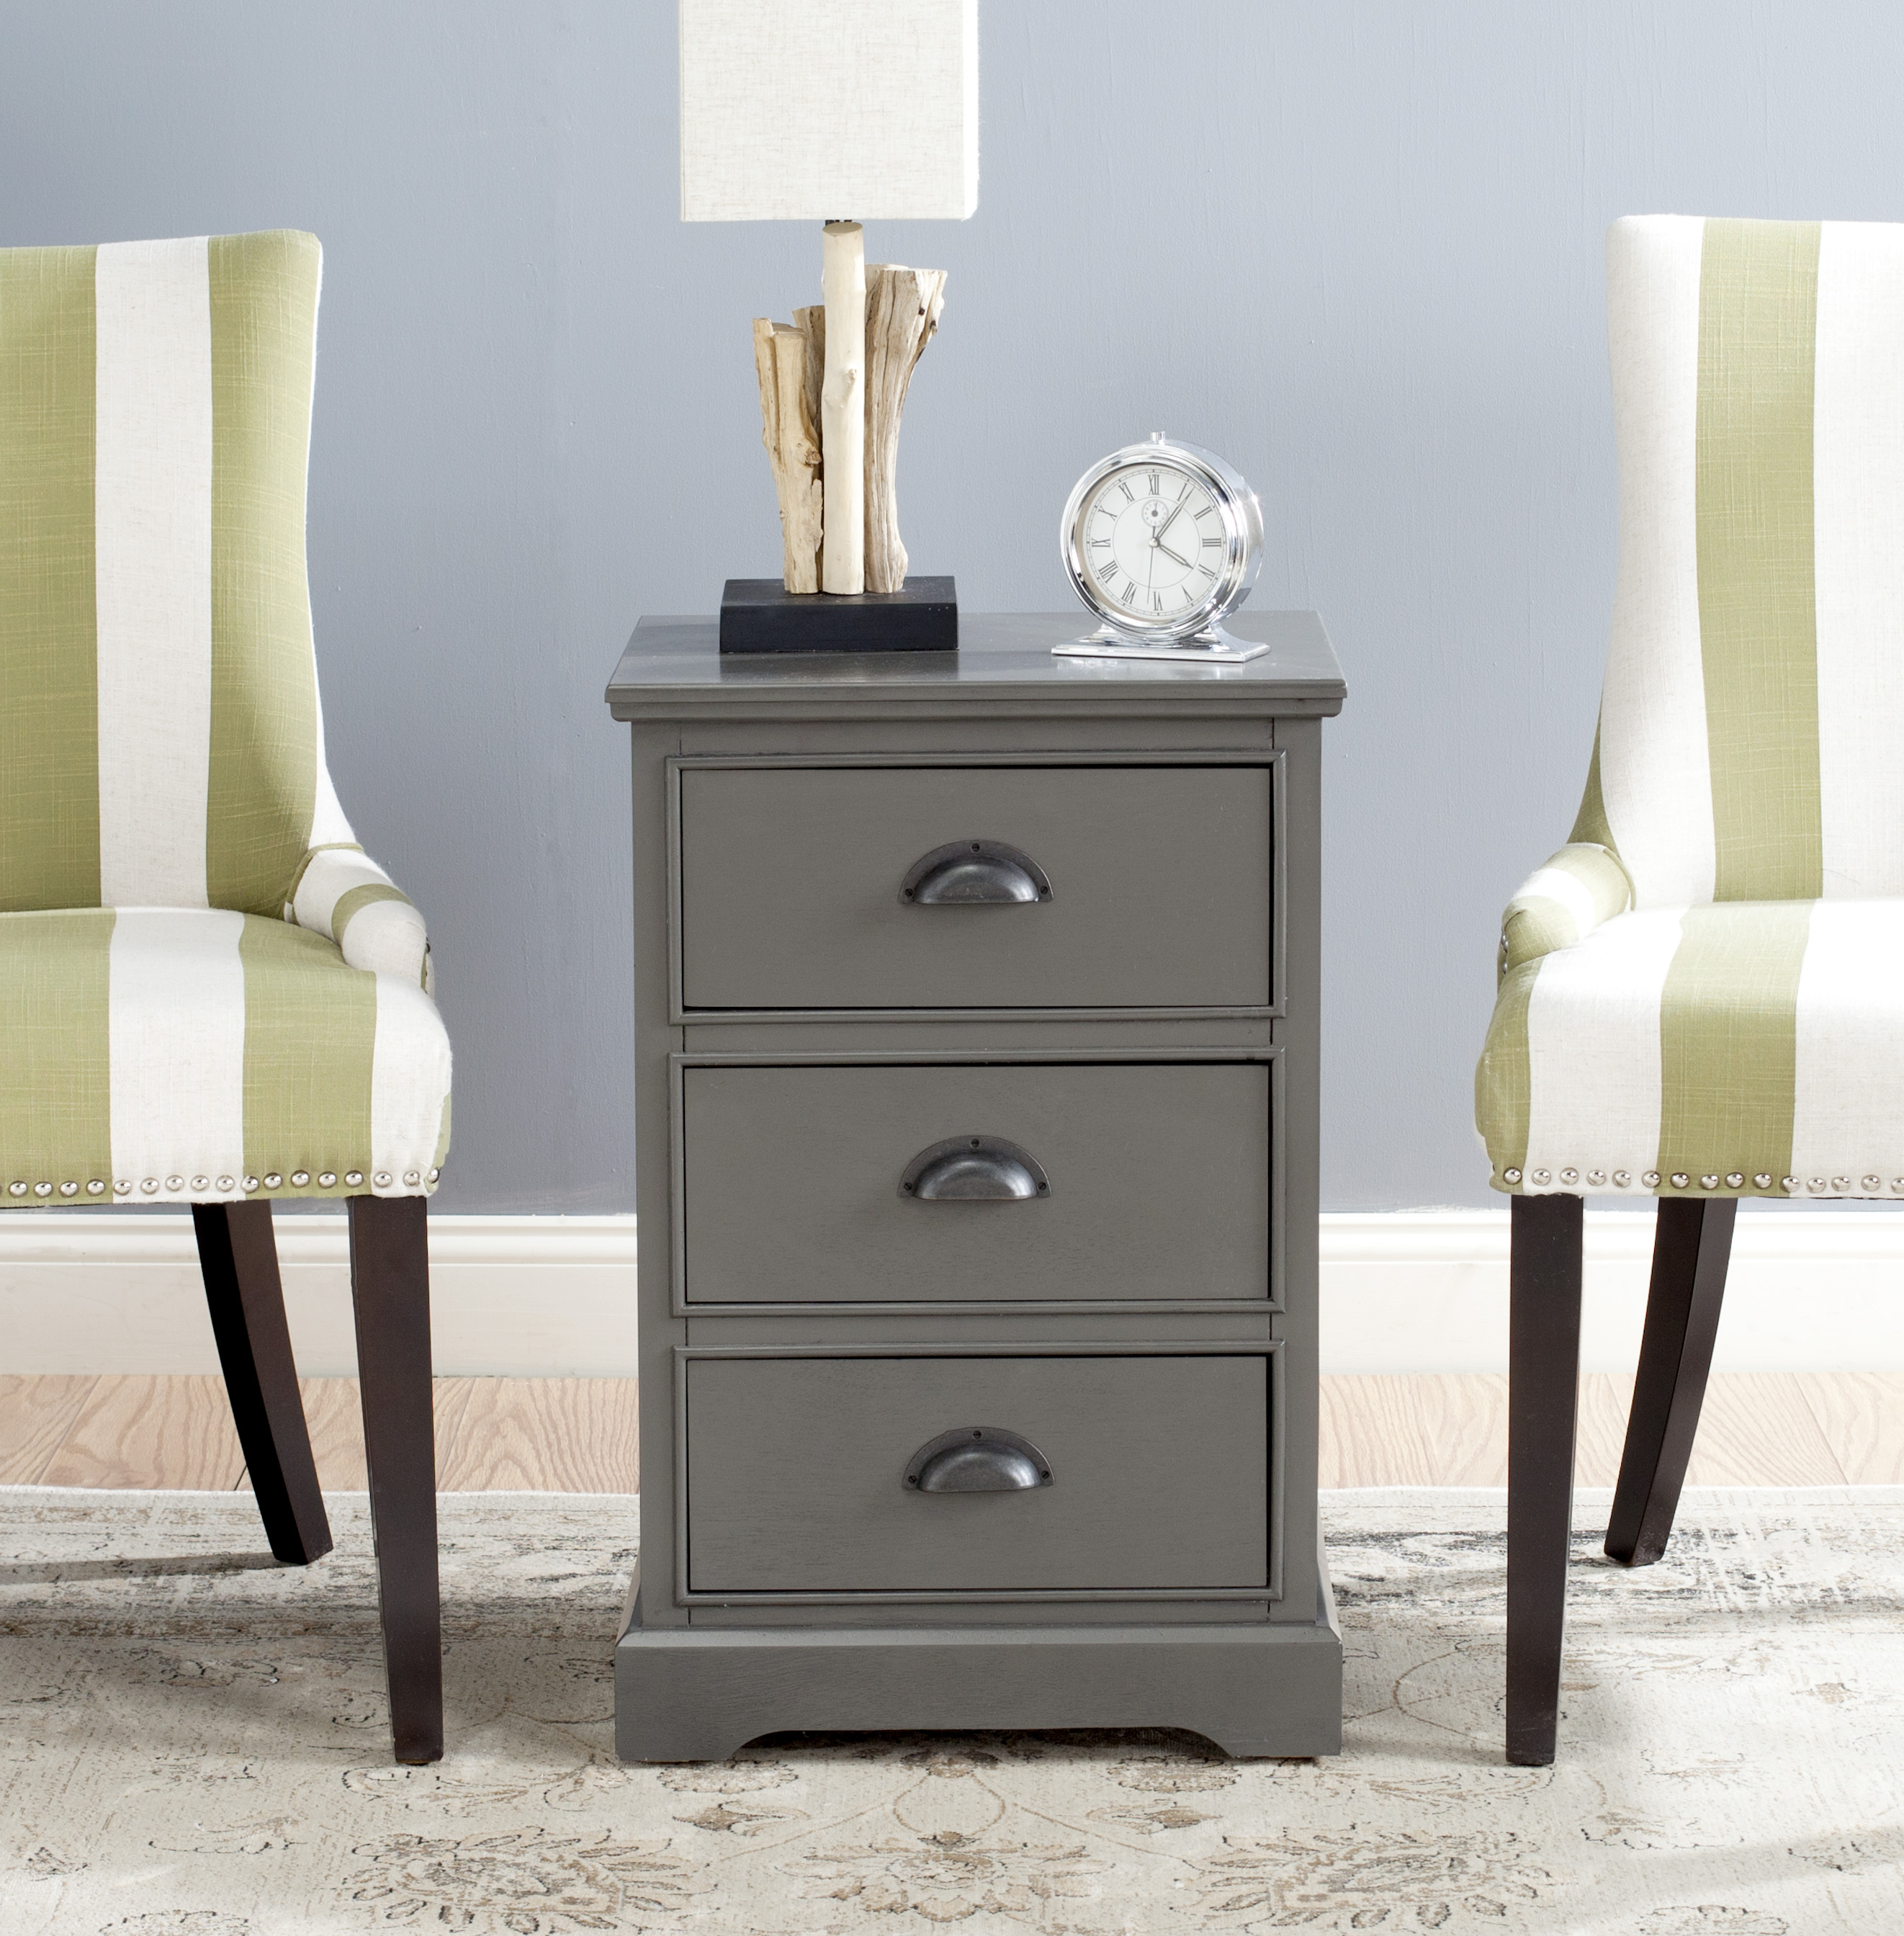 SAFAVIEH Griffin Traditional Rustic 3 Drawer Side Table, Grey - image 1 of 4